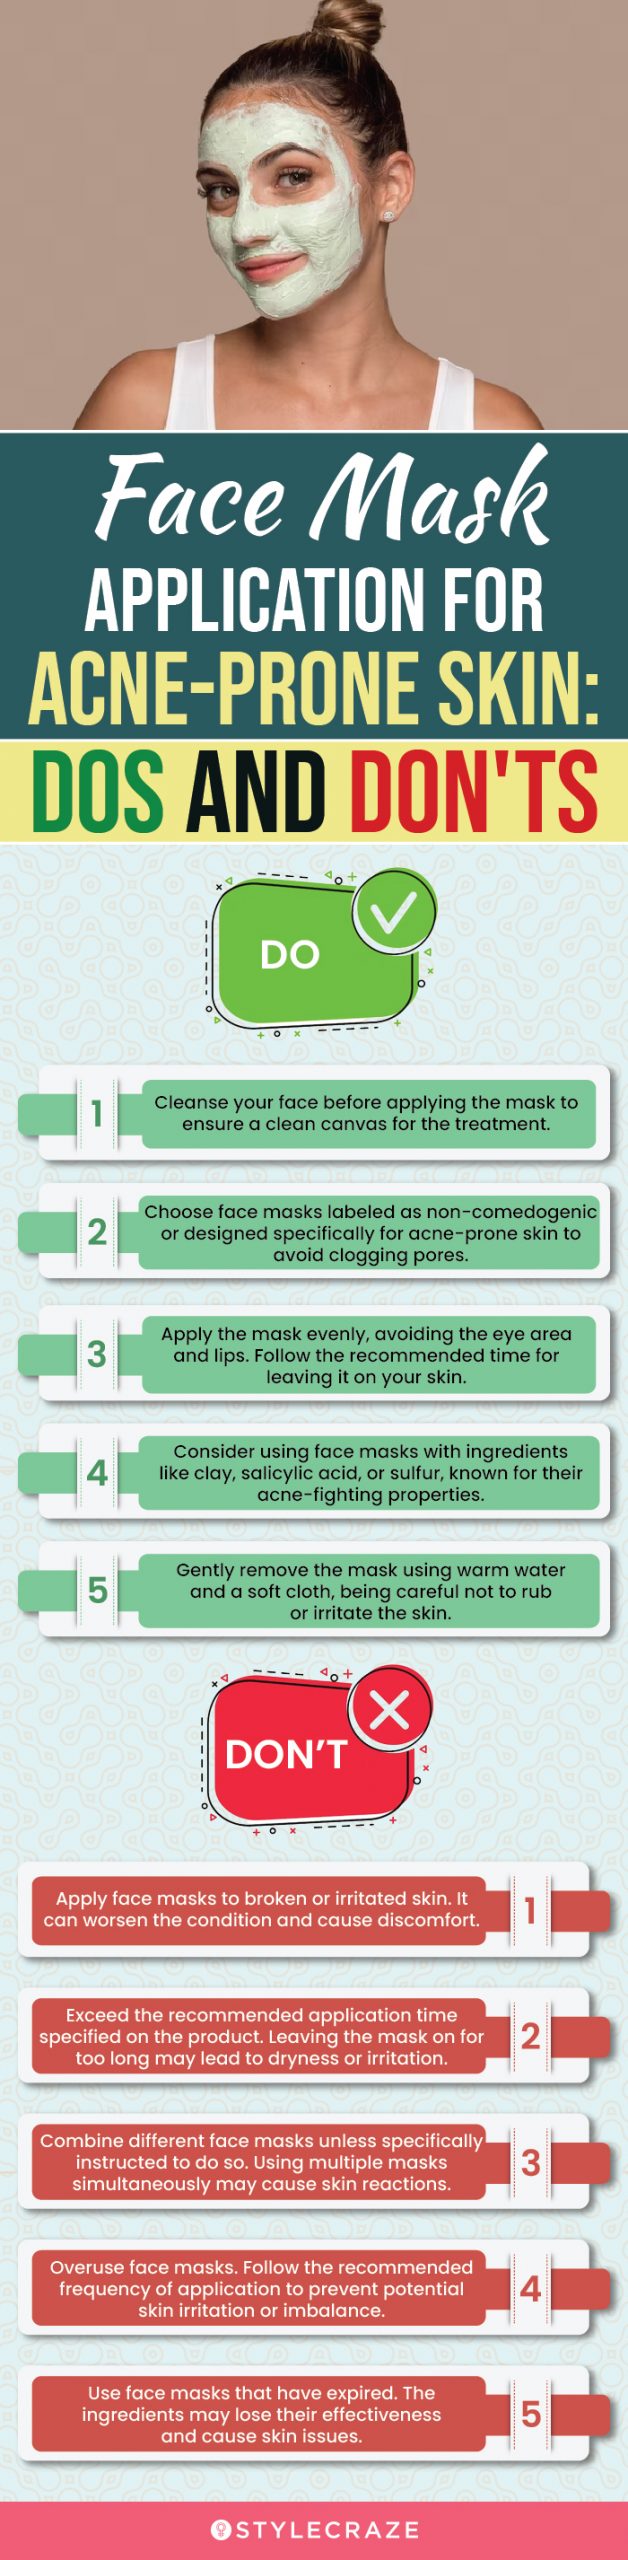 Face Mask Application For Acne-Prone Skin: Dos and Don'ts (infographic)